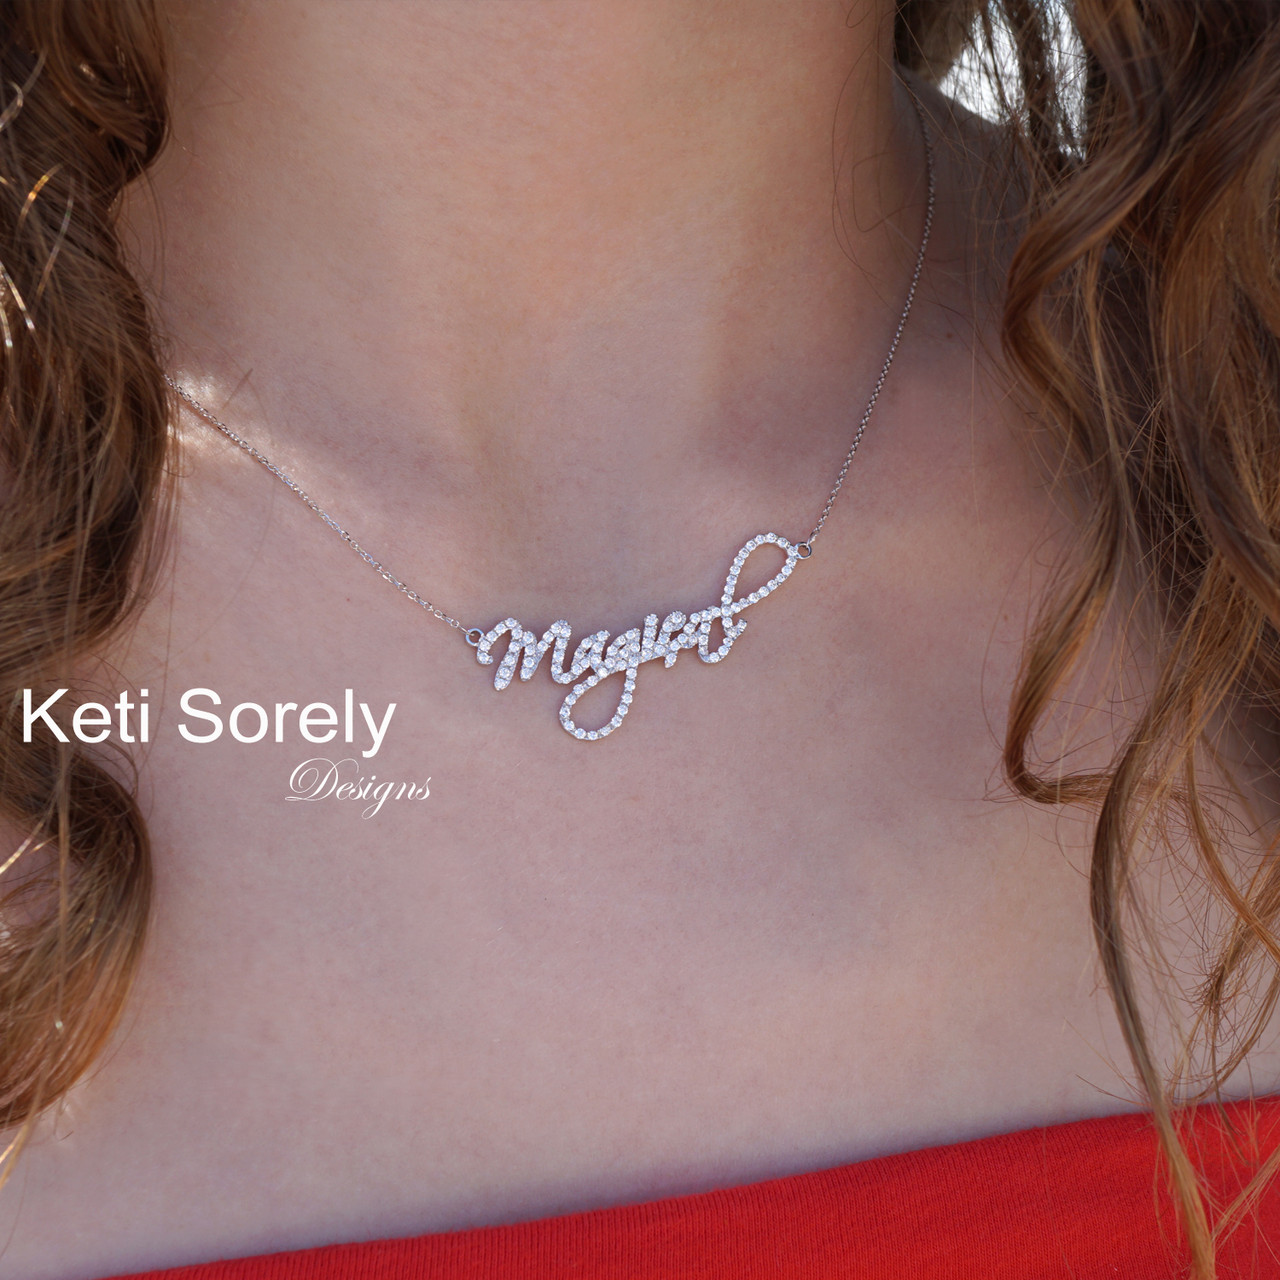 Personalized Name Necklace With Cubic Zirconia Stones In Fancy